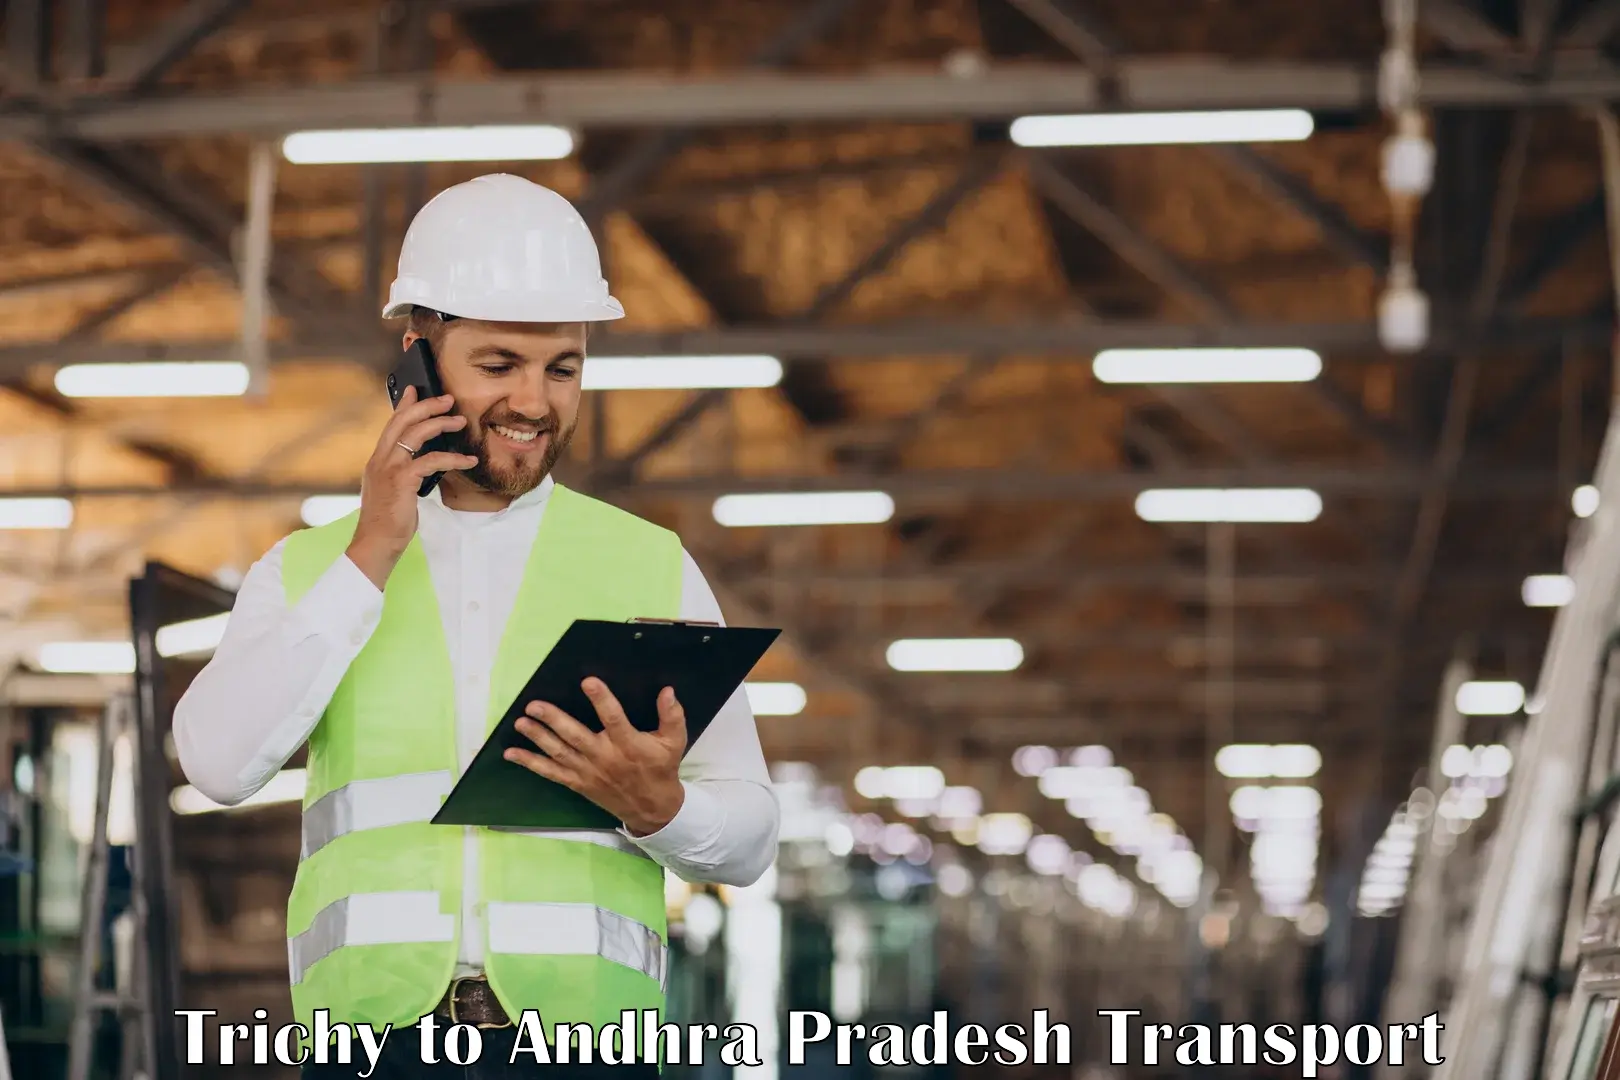 Express transport services Trichy to Andhra Pradesh